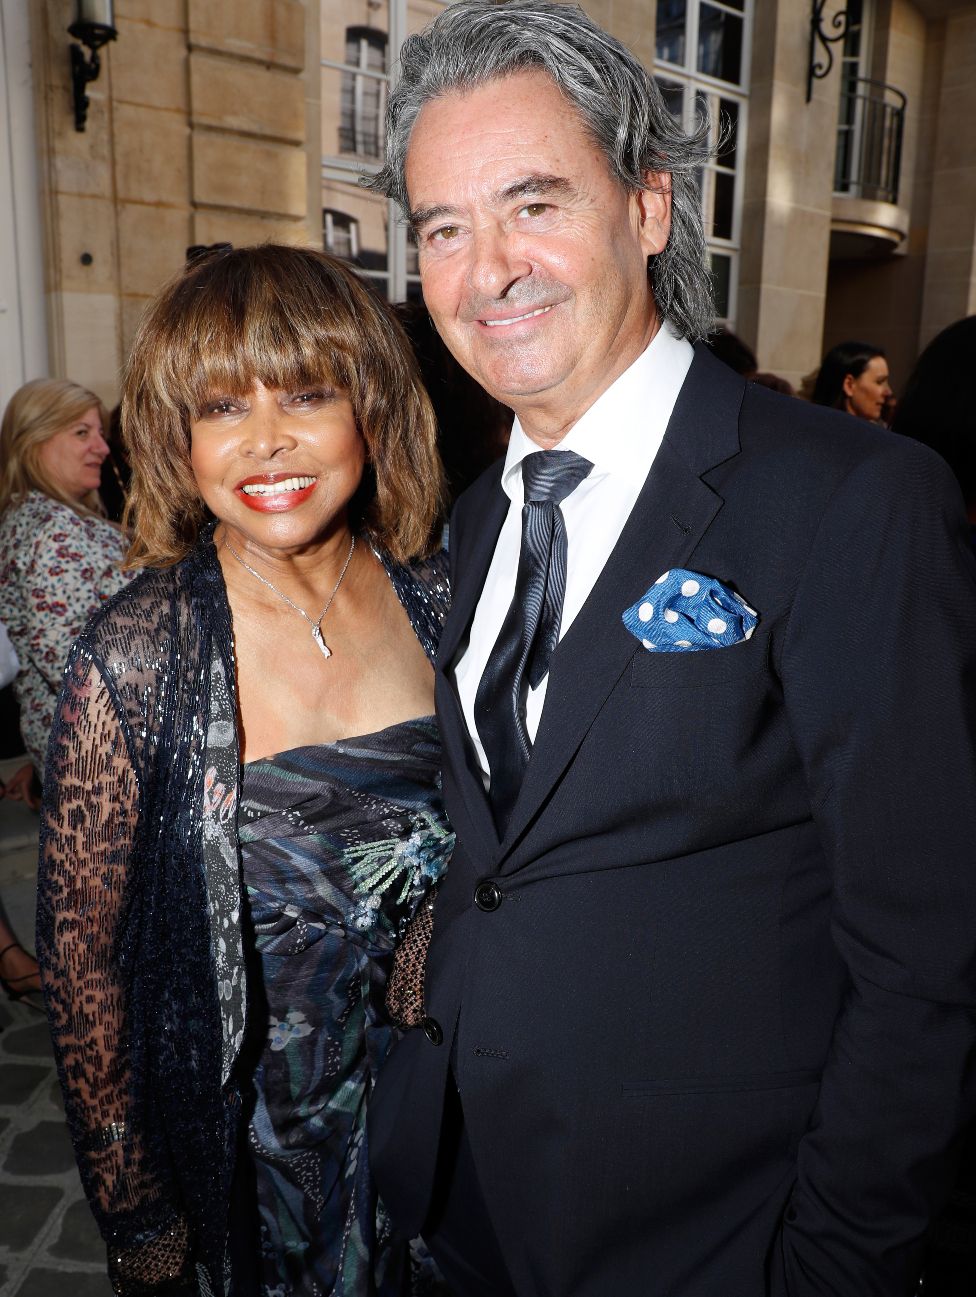 Tina Turner With her husband Erwin Bach in 2018